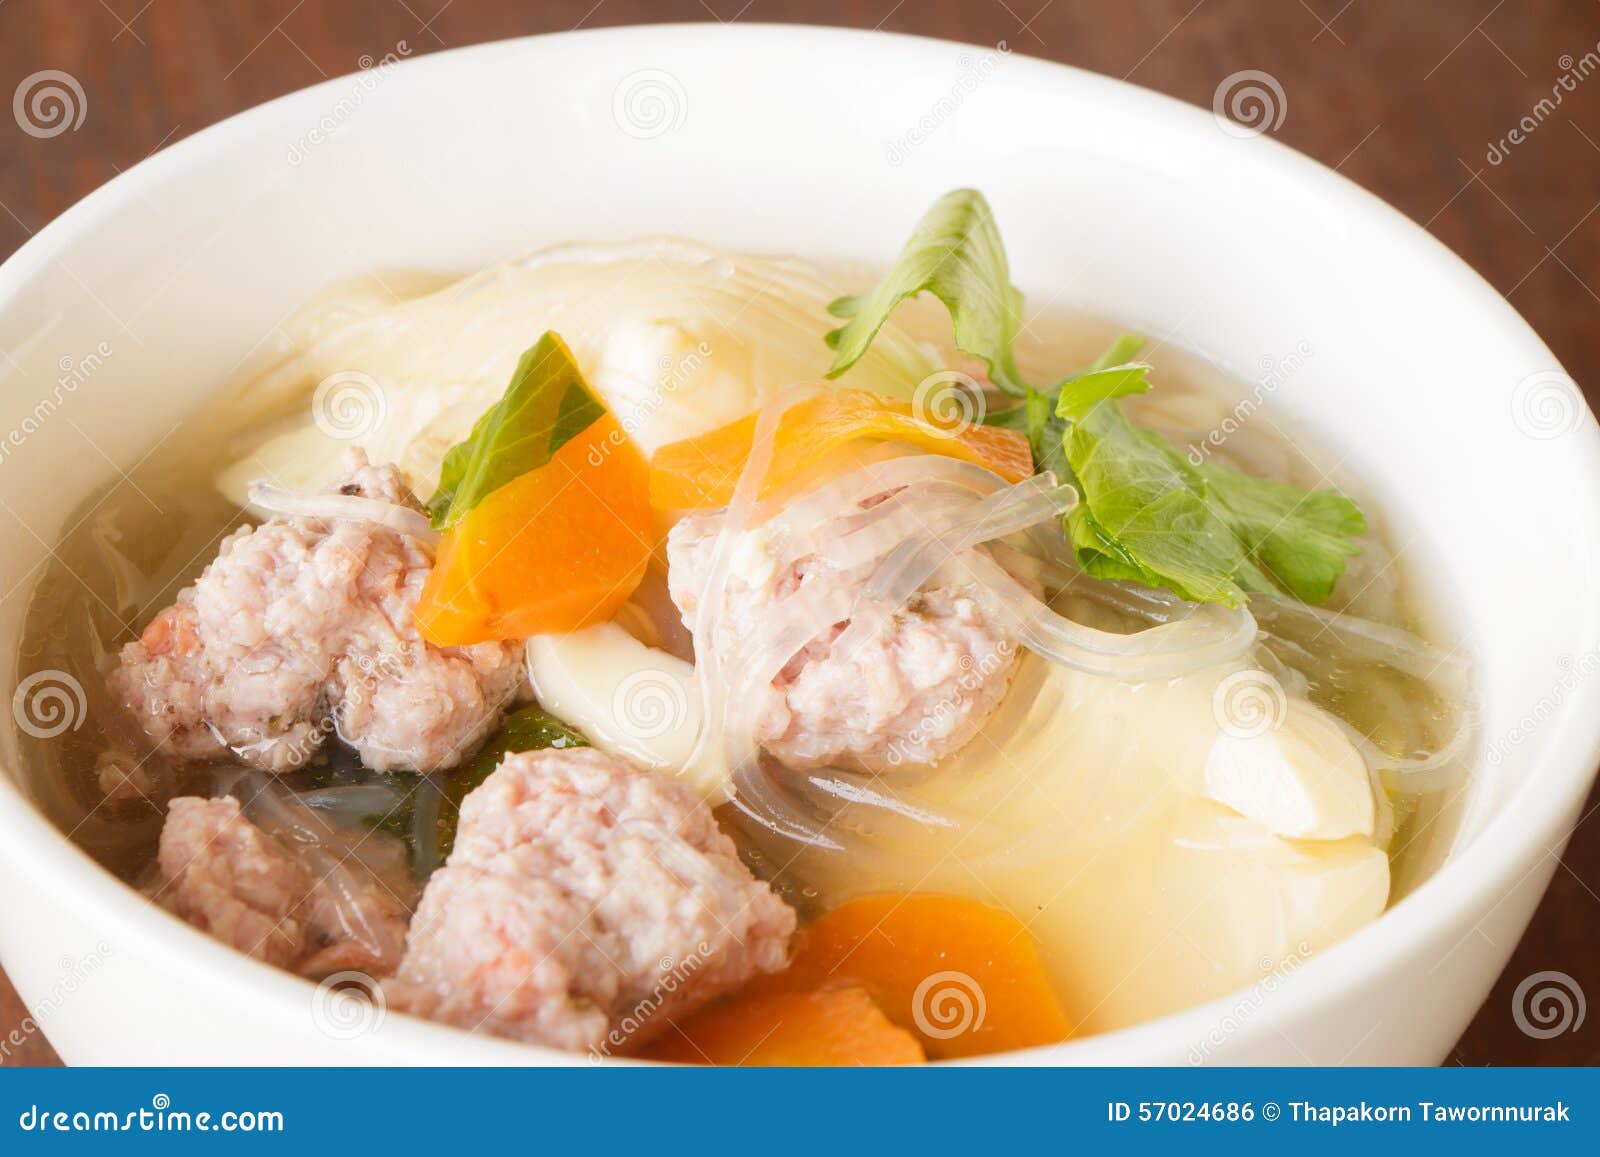 Clear Soup With Pork In White Plate Put On Wooden Background, Stock ...